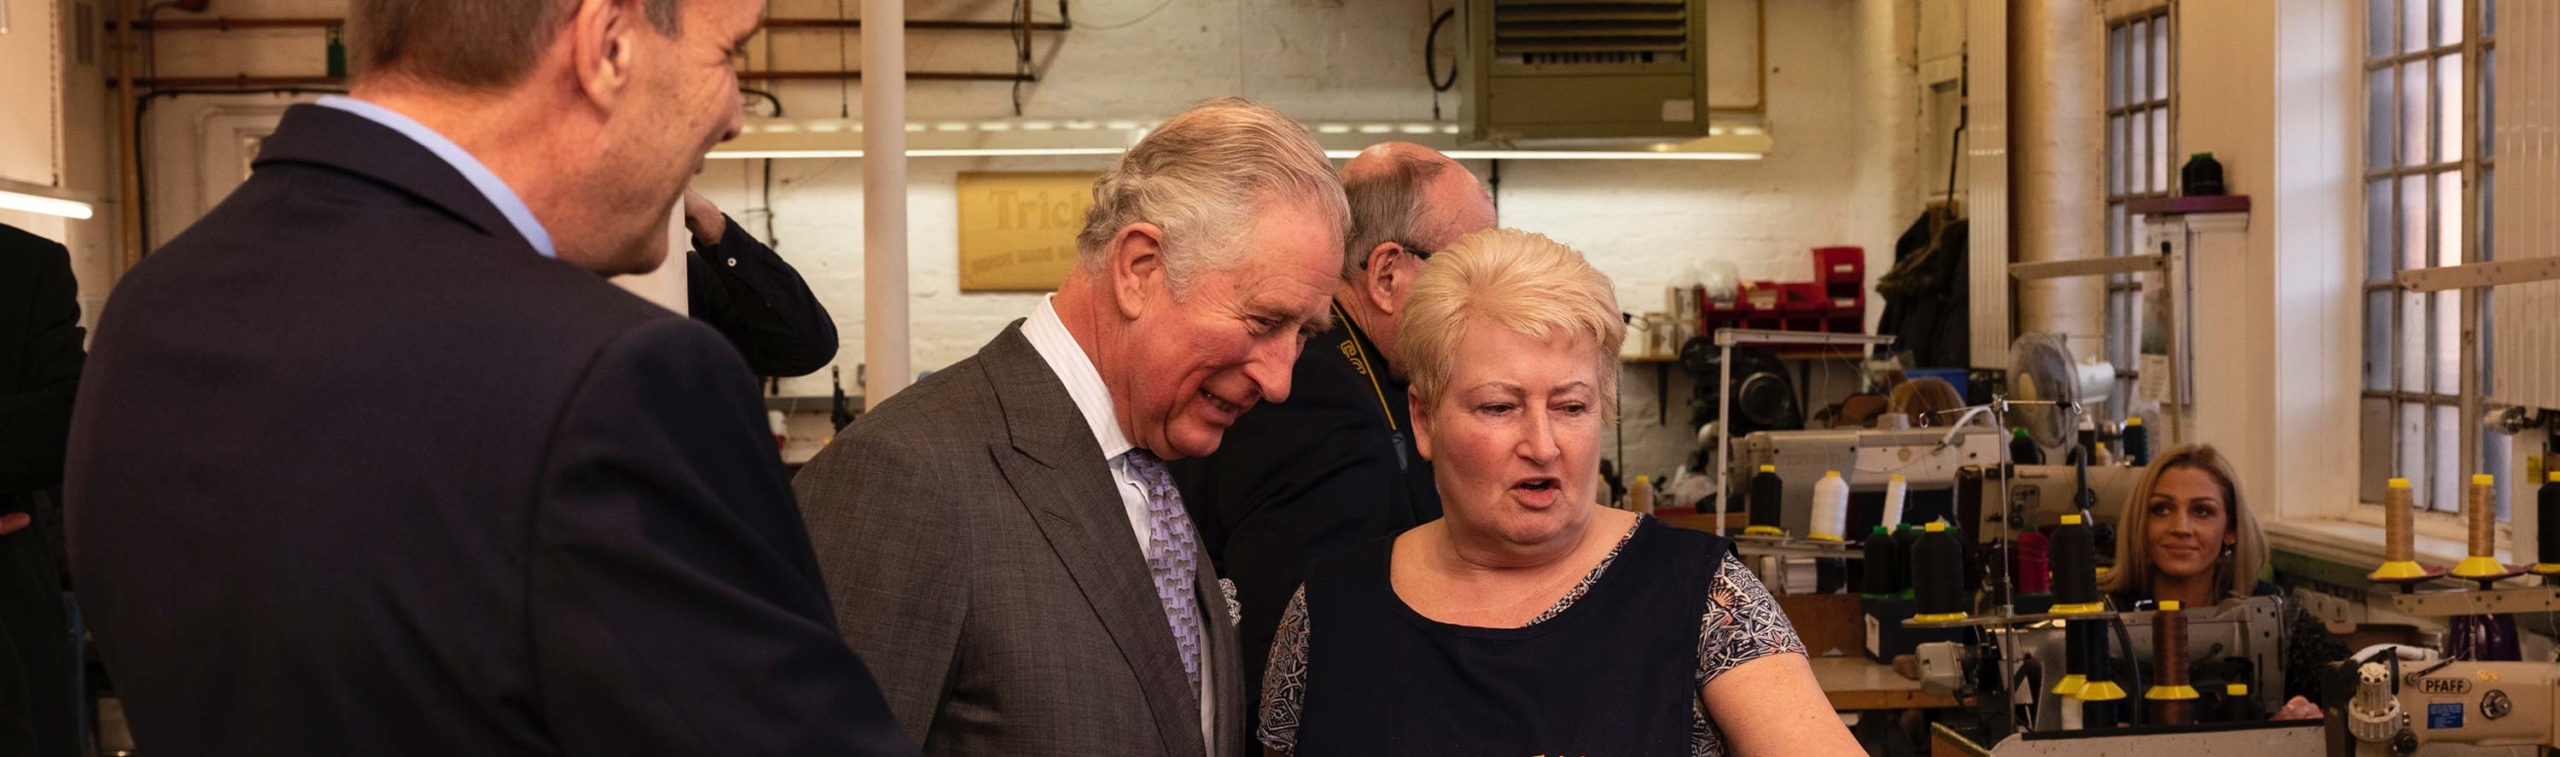 Prince Charles visits the Boot and Shoe industry in Northampton